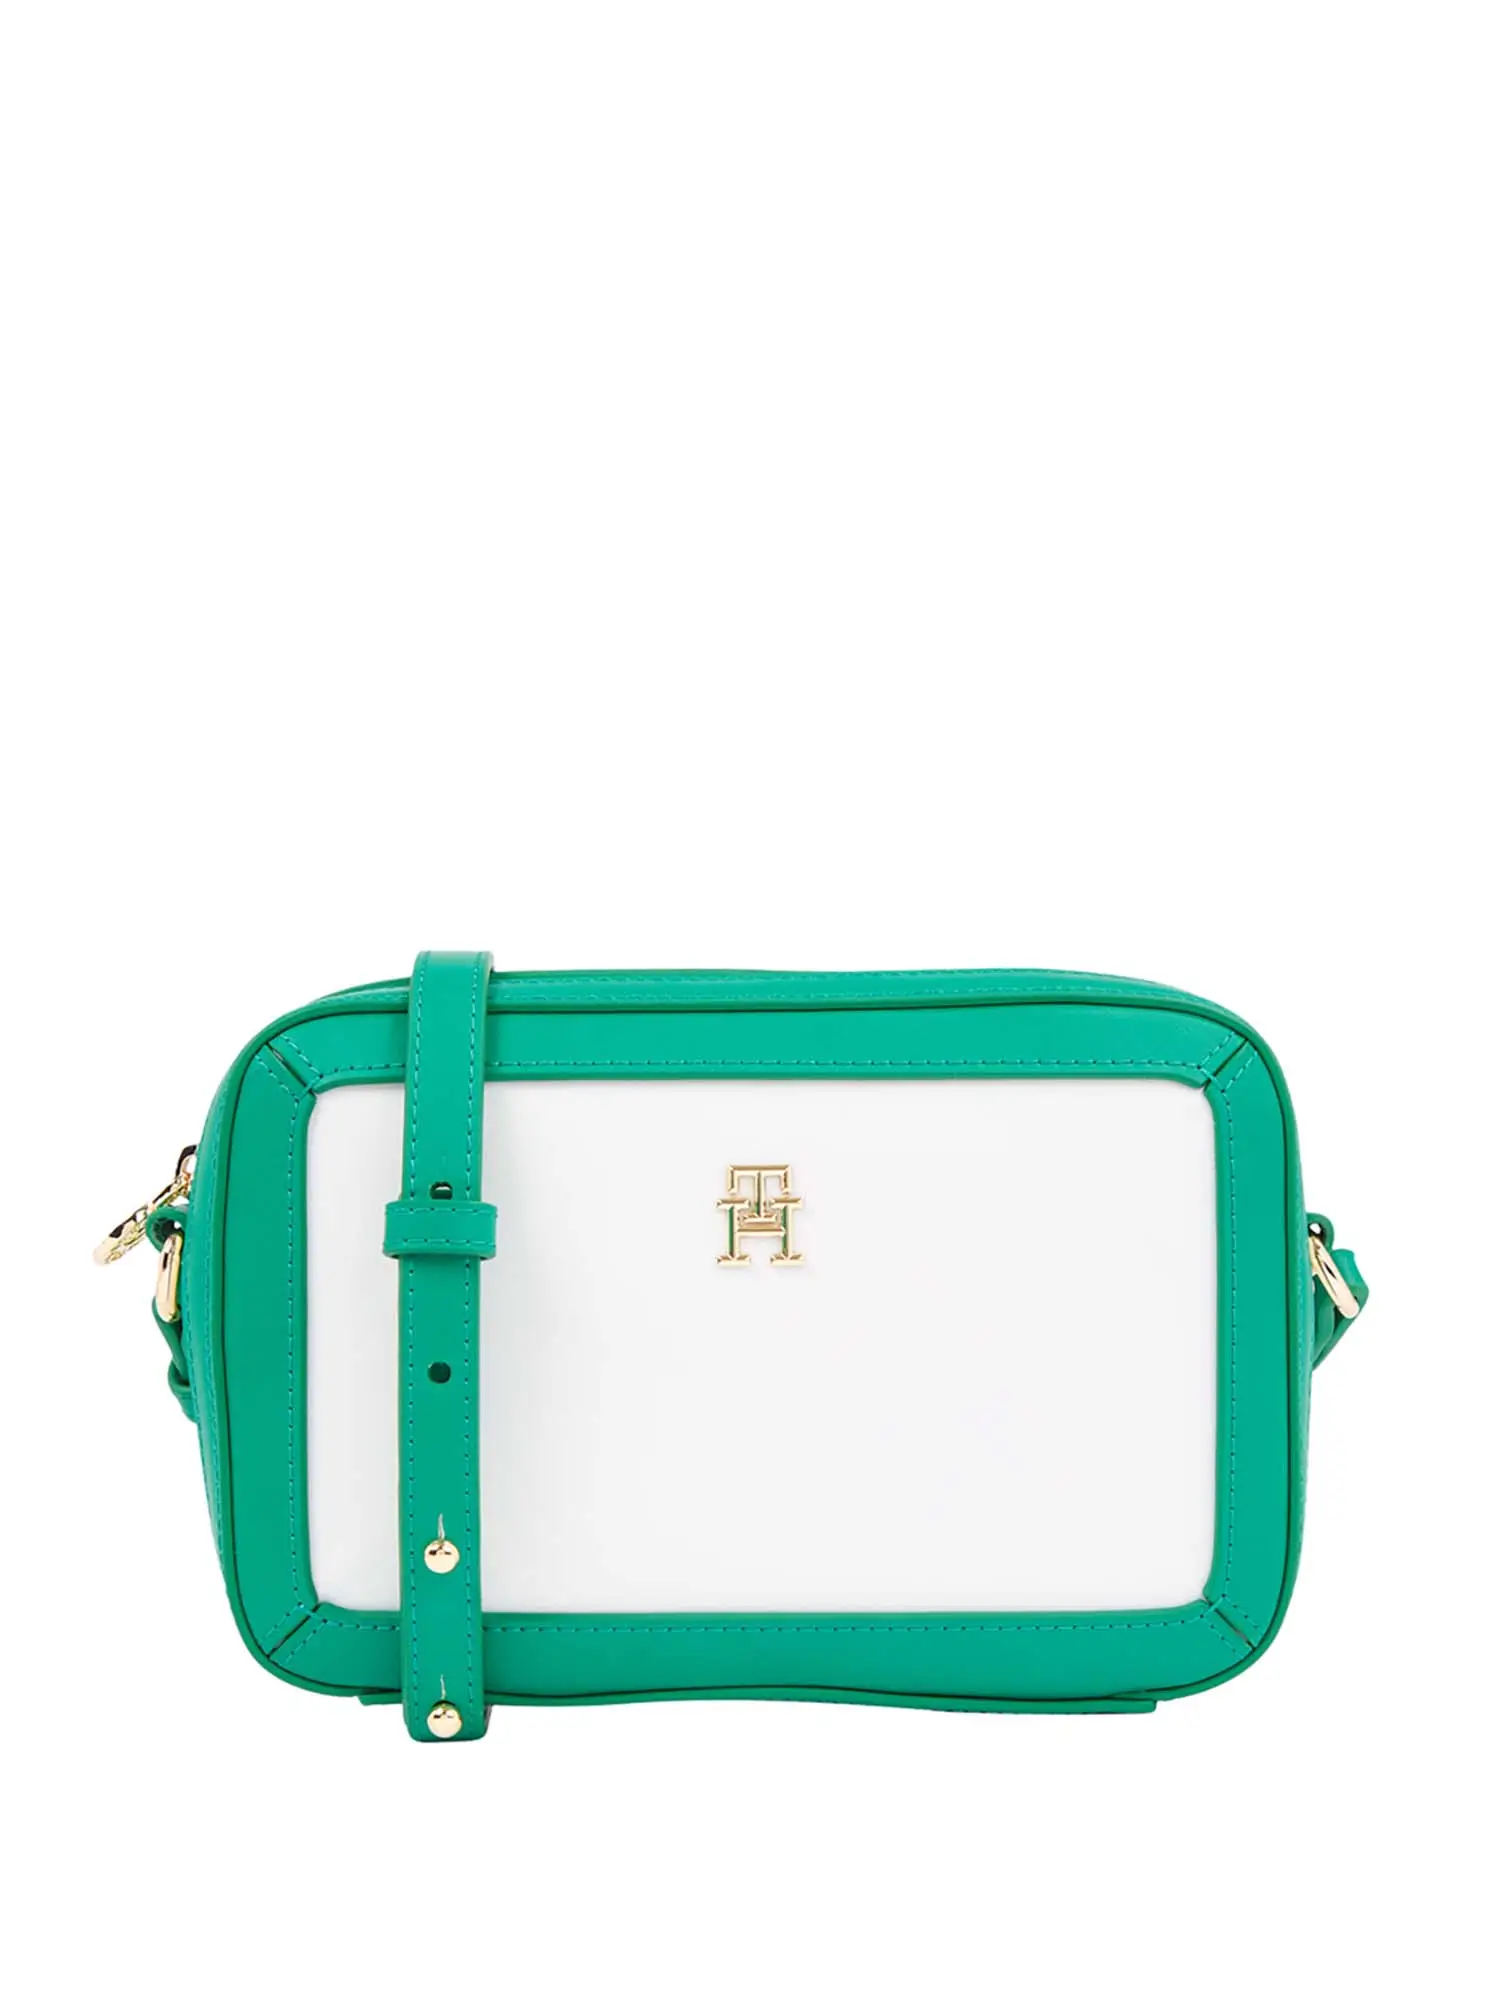 TRACOLLA DONNA - TOMMY HILFIGER - AW0AW16428 - ECRU/VERDE, UNICA